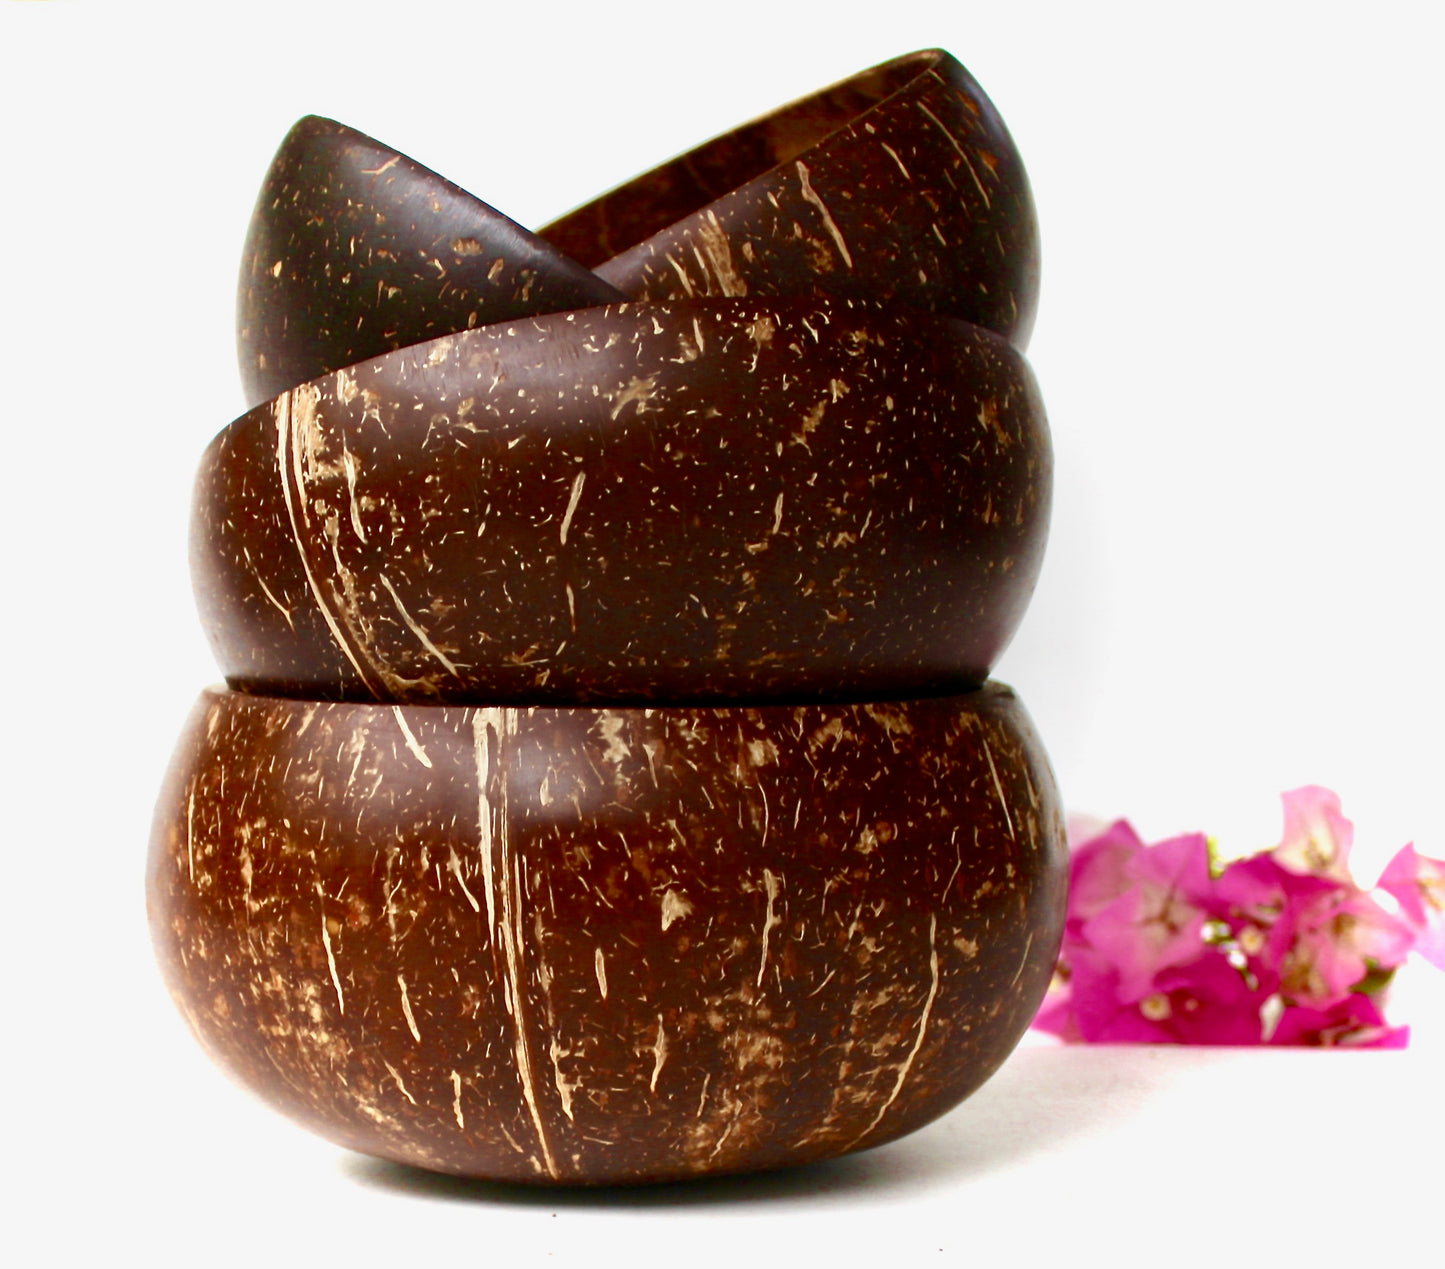 Coconut Bowl Organic - Natural - Zero wast 2 Pic Shell and 2 Fork - @ Spoon  Gift for her